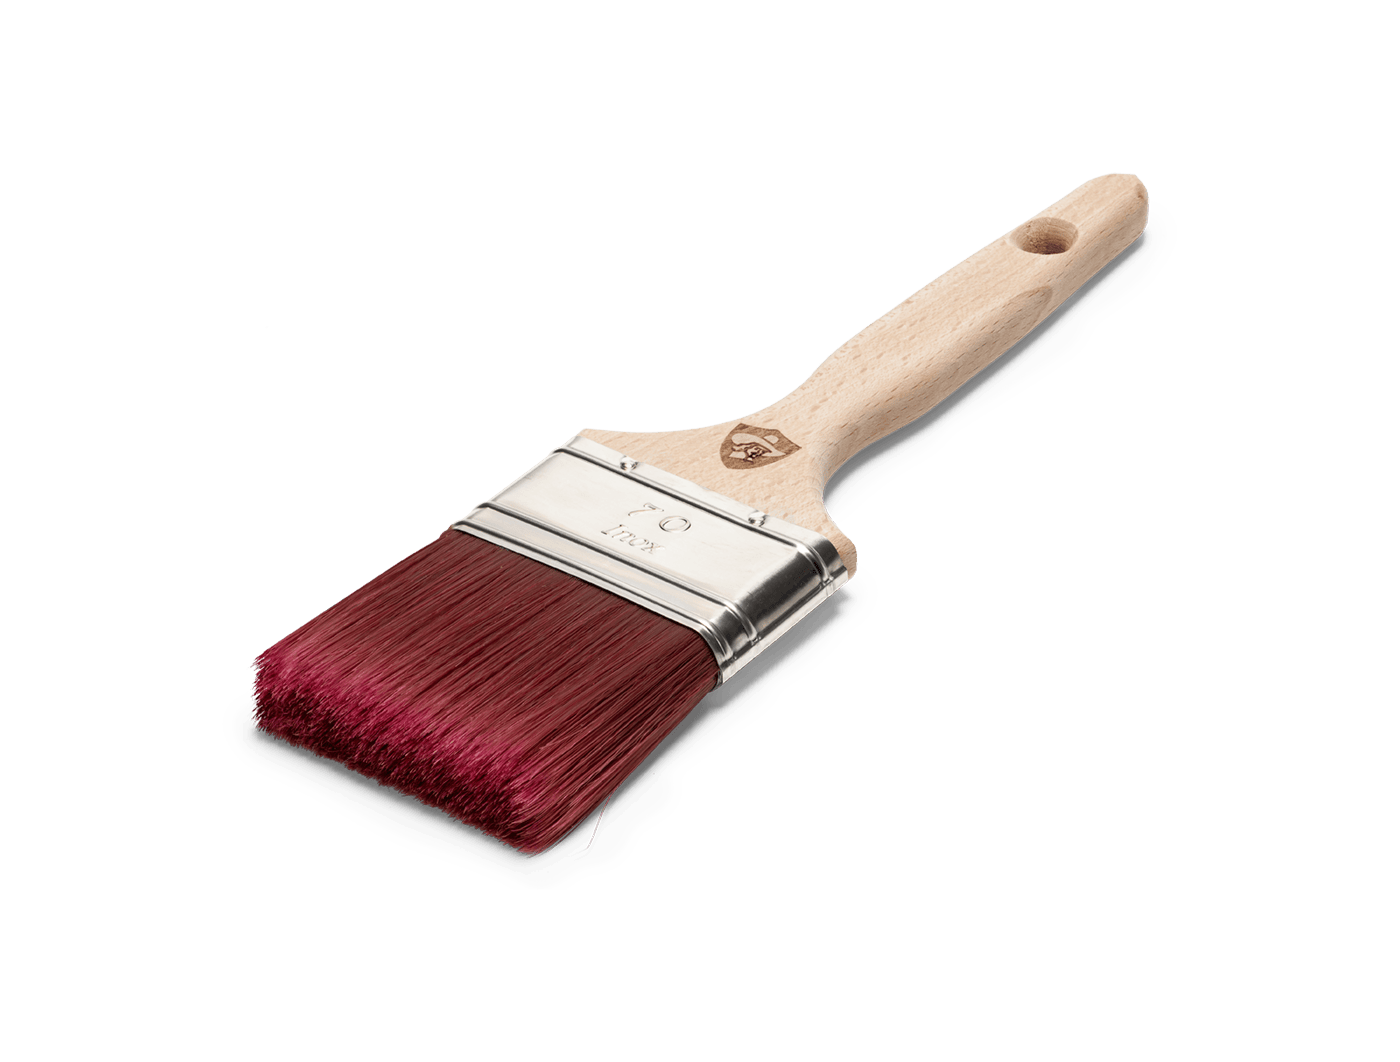 Staalmeester 2027 Flat Brush from Pro-Hybrid Series available at Flip Runway